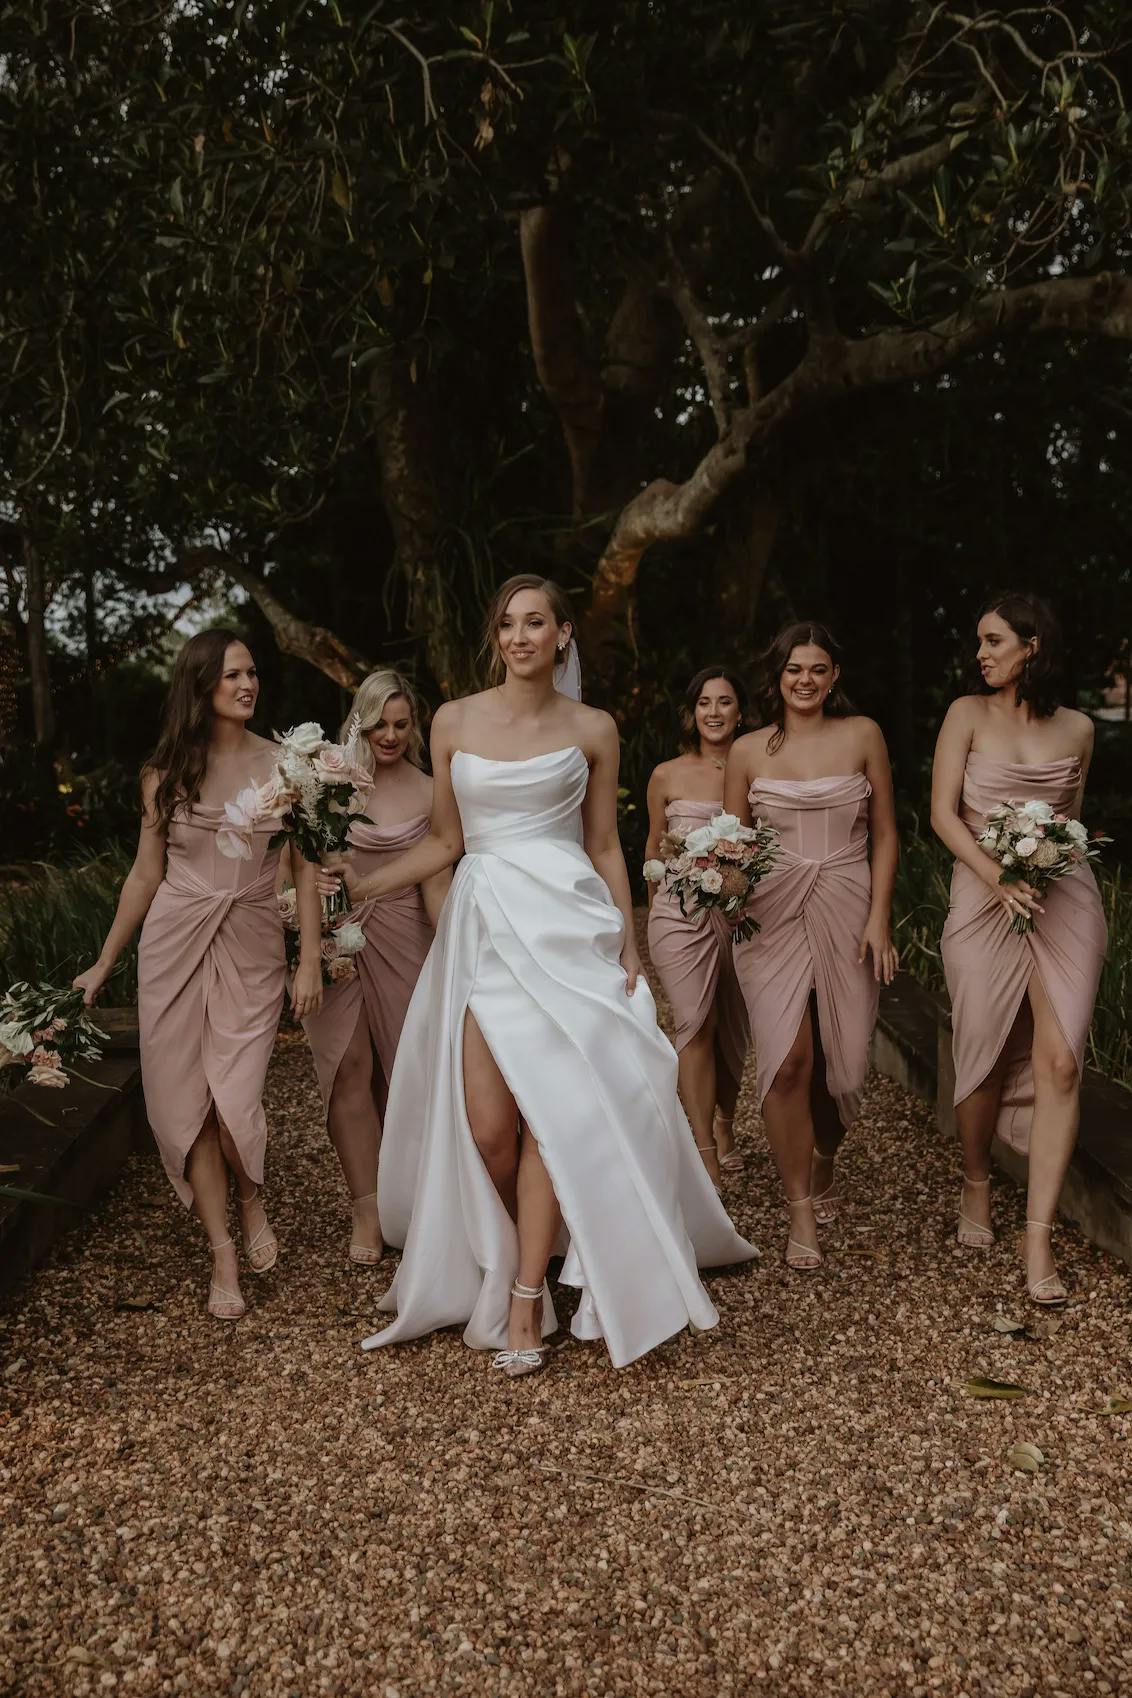 A bride in a white wedding dress walks down a gravel path, accompanied by five bridesmaids wearing matching soft pink dresses. Each bridesmaid holds a bouquet of flowers. They are all smiling and appear to be having a joyful moment together. Trees and foliage are in the background.